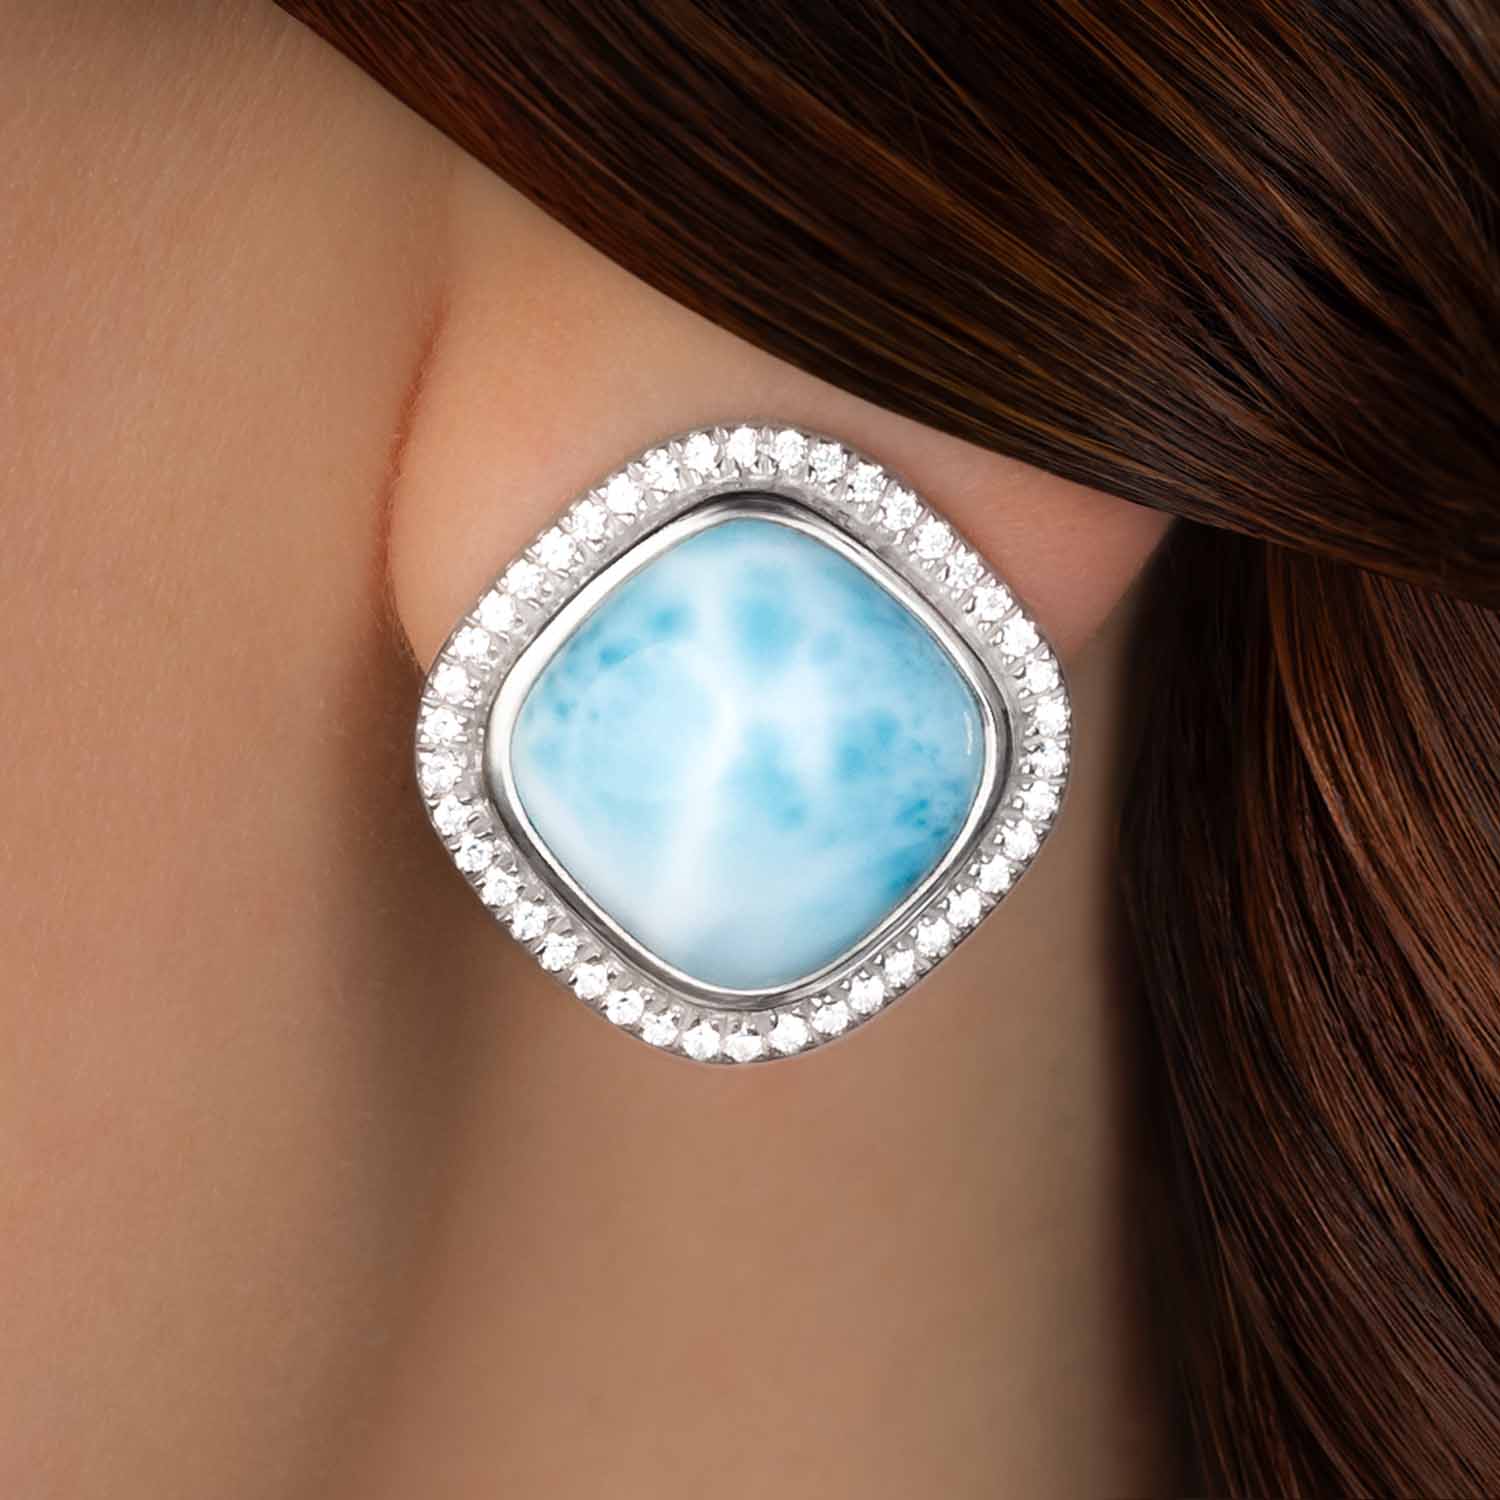 Big Stud Earrings with larimar and sapphires by Marahlago 